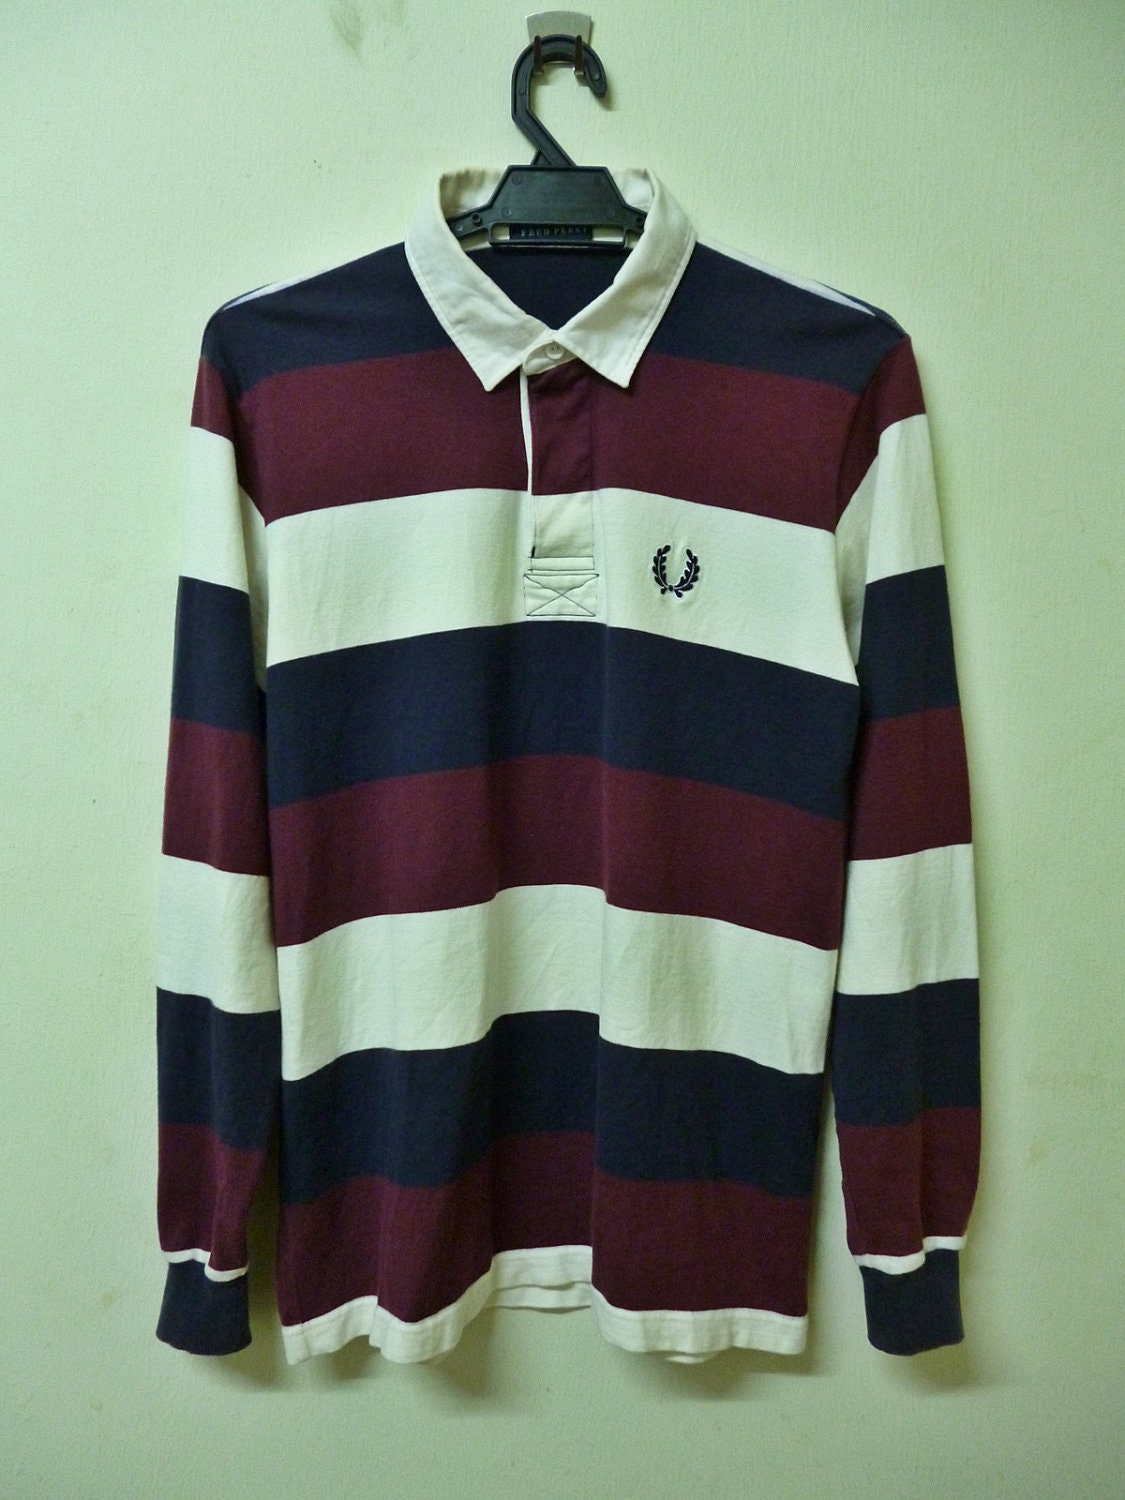 Vintage Fred perry longsleeve rugby shirt tee by THRIFTEDISABELLE